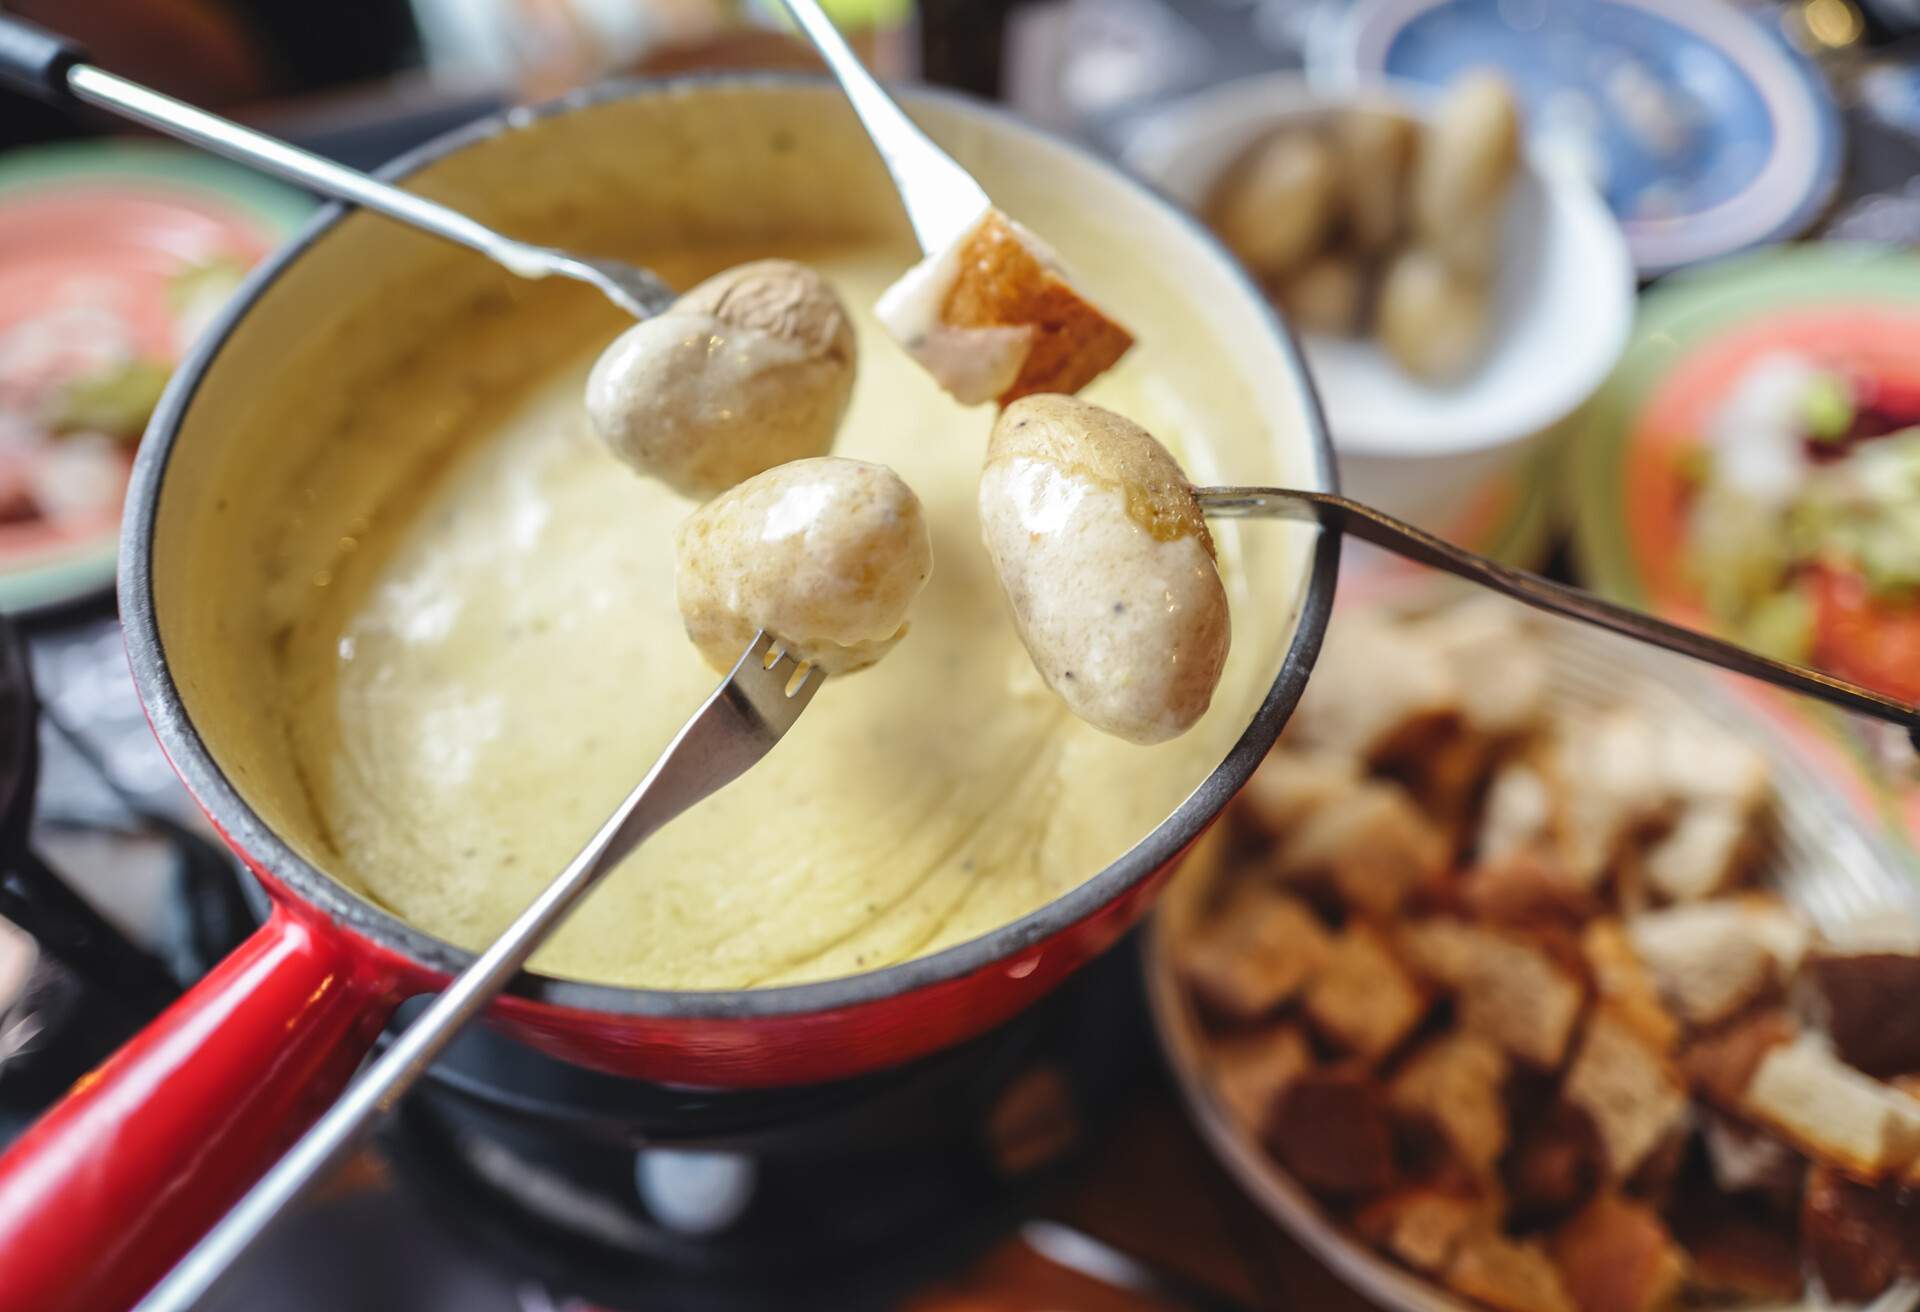 The famous authentic Swiss cheese fondue served in an earthenware pot, with cubed breads and potatoes  dipping into rich melted cheese, landmark of Switzerland.